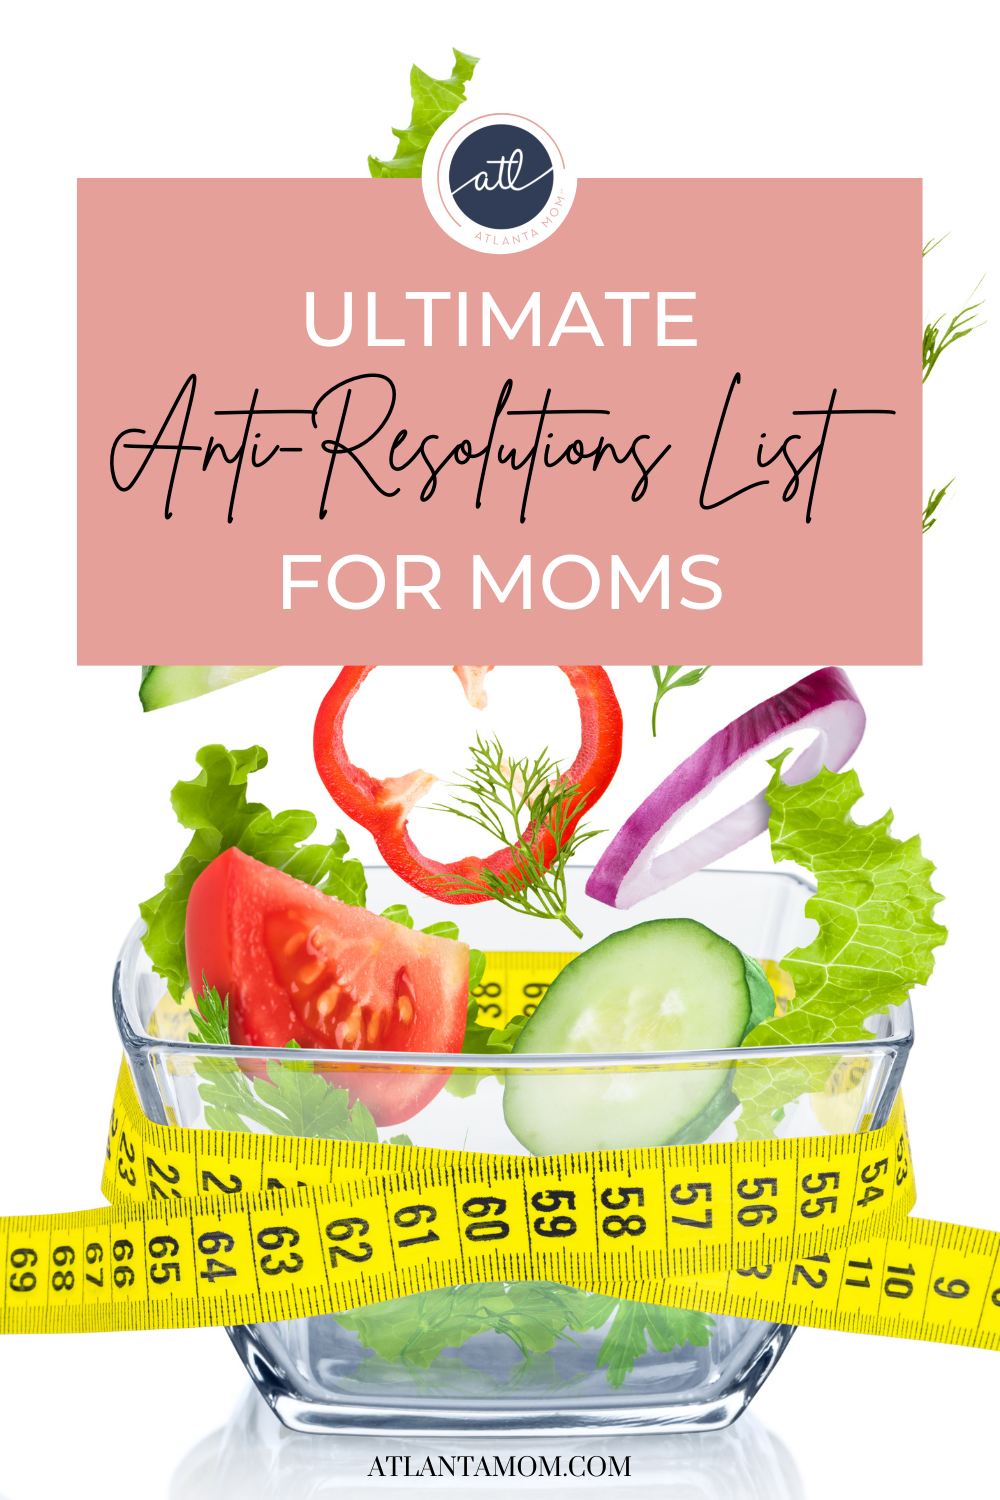 anti resolutions for moms